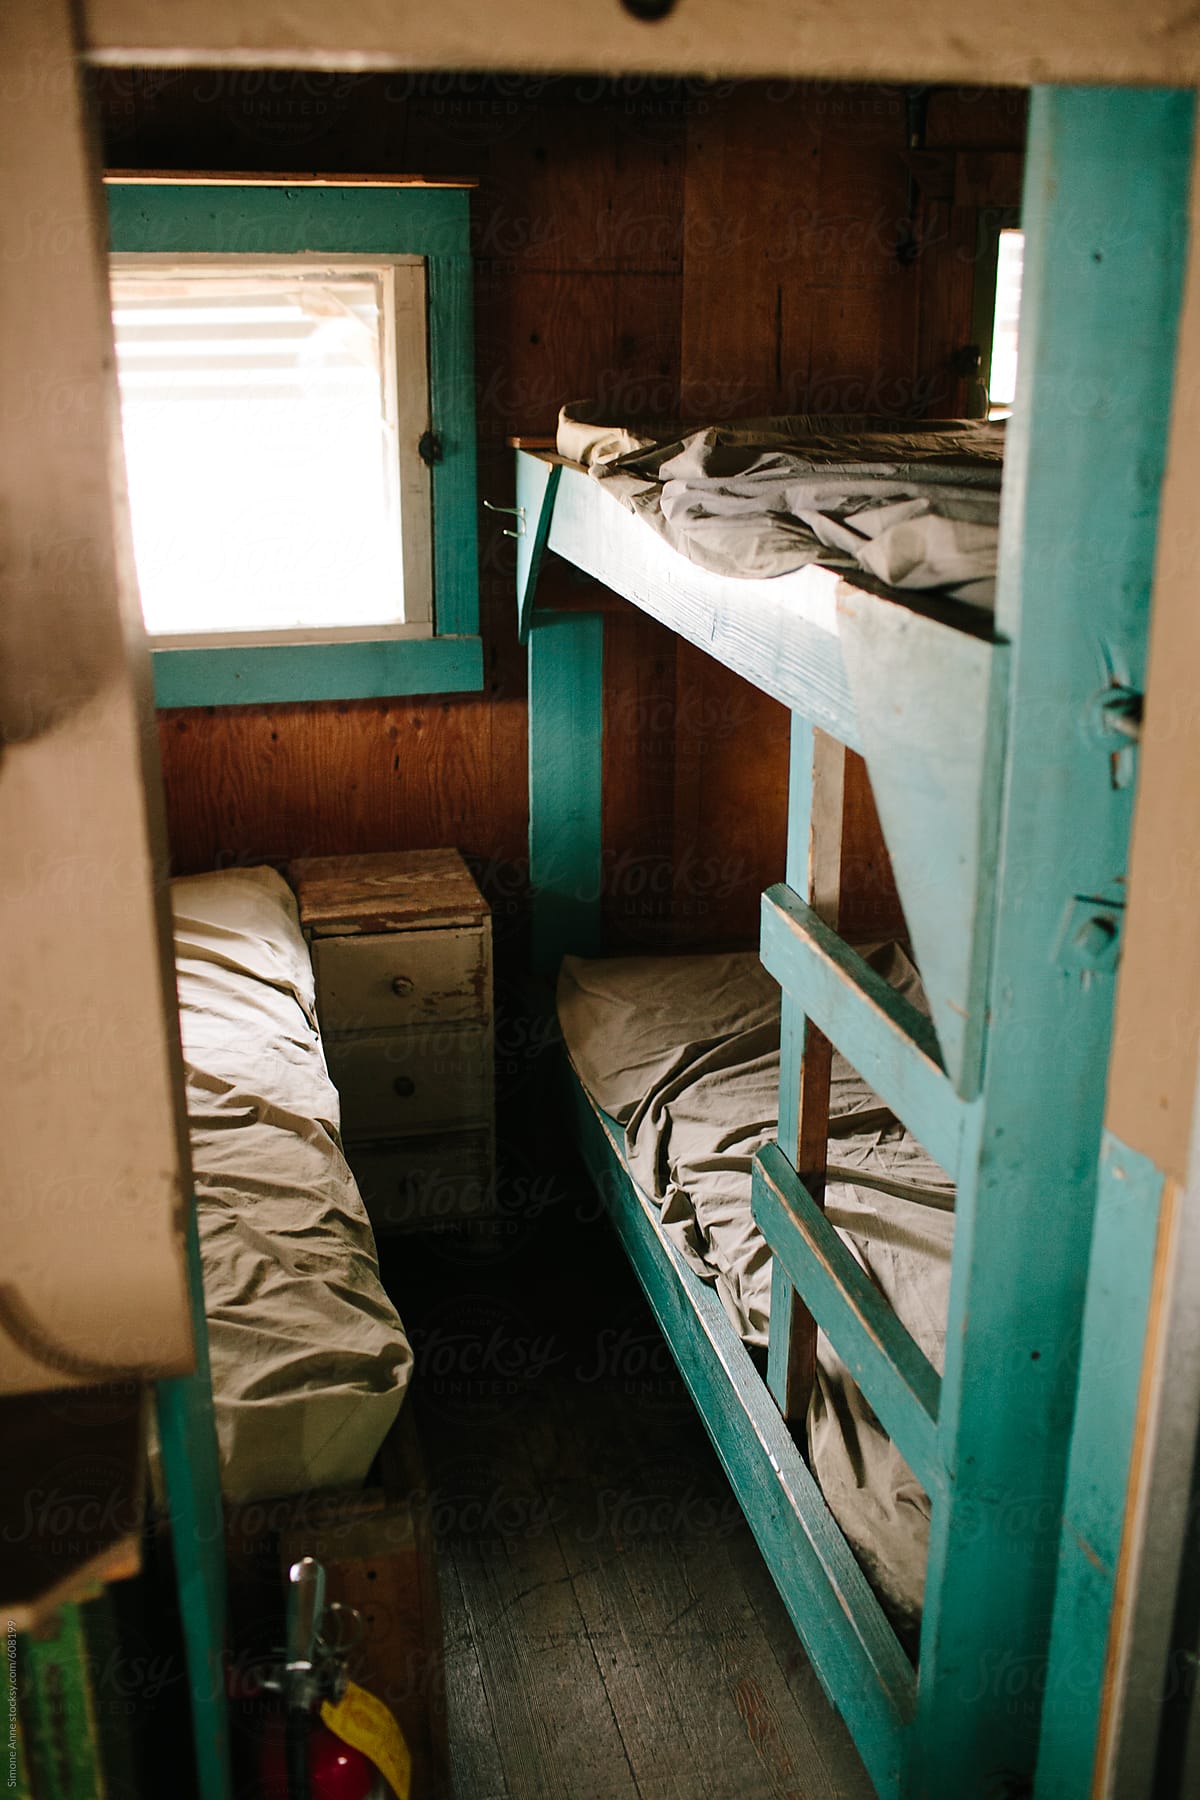 Simple wooden bunk beds with rumpled sheets